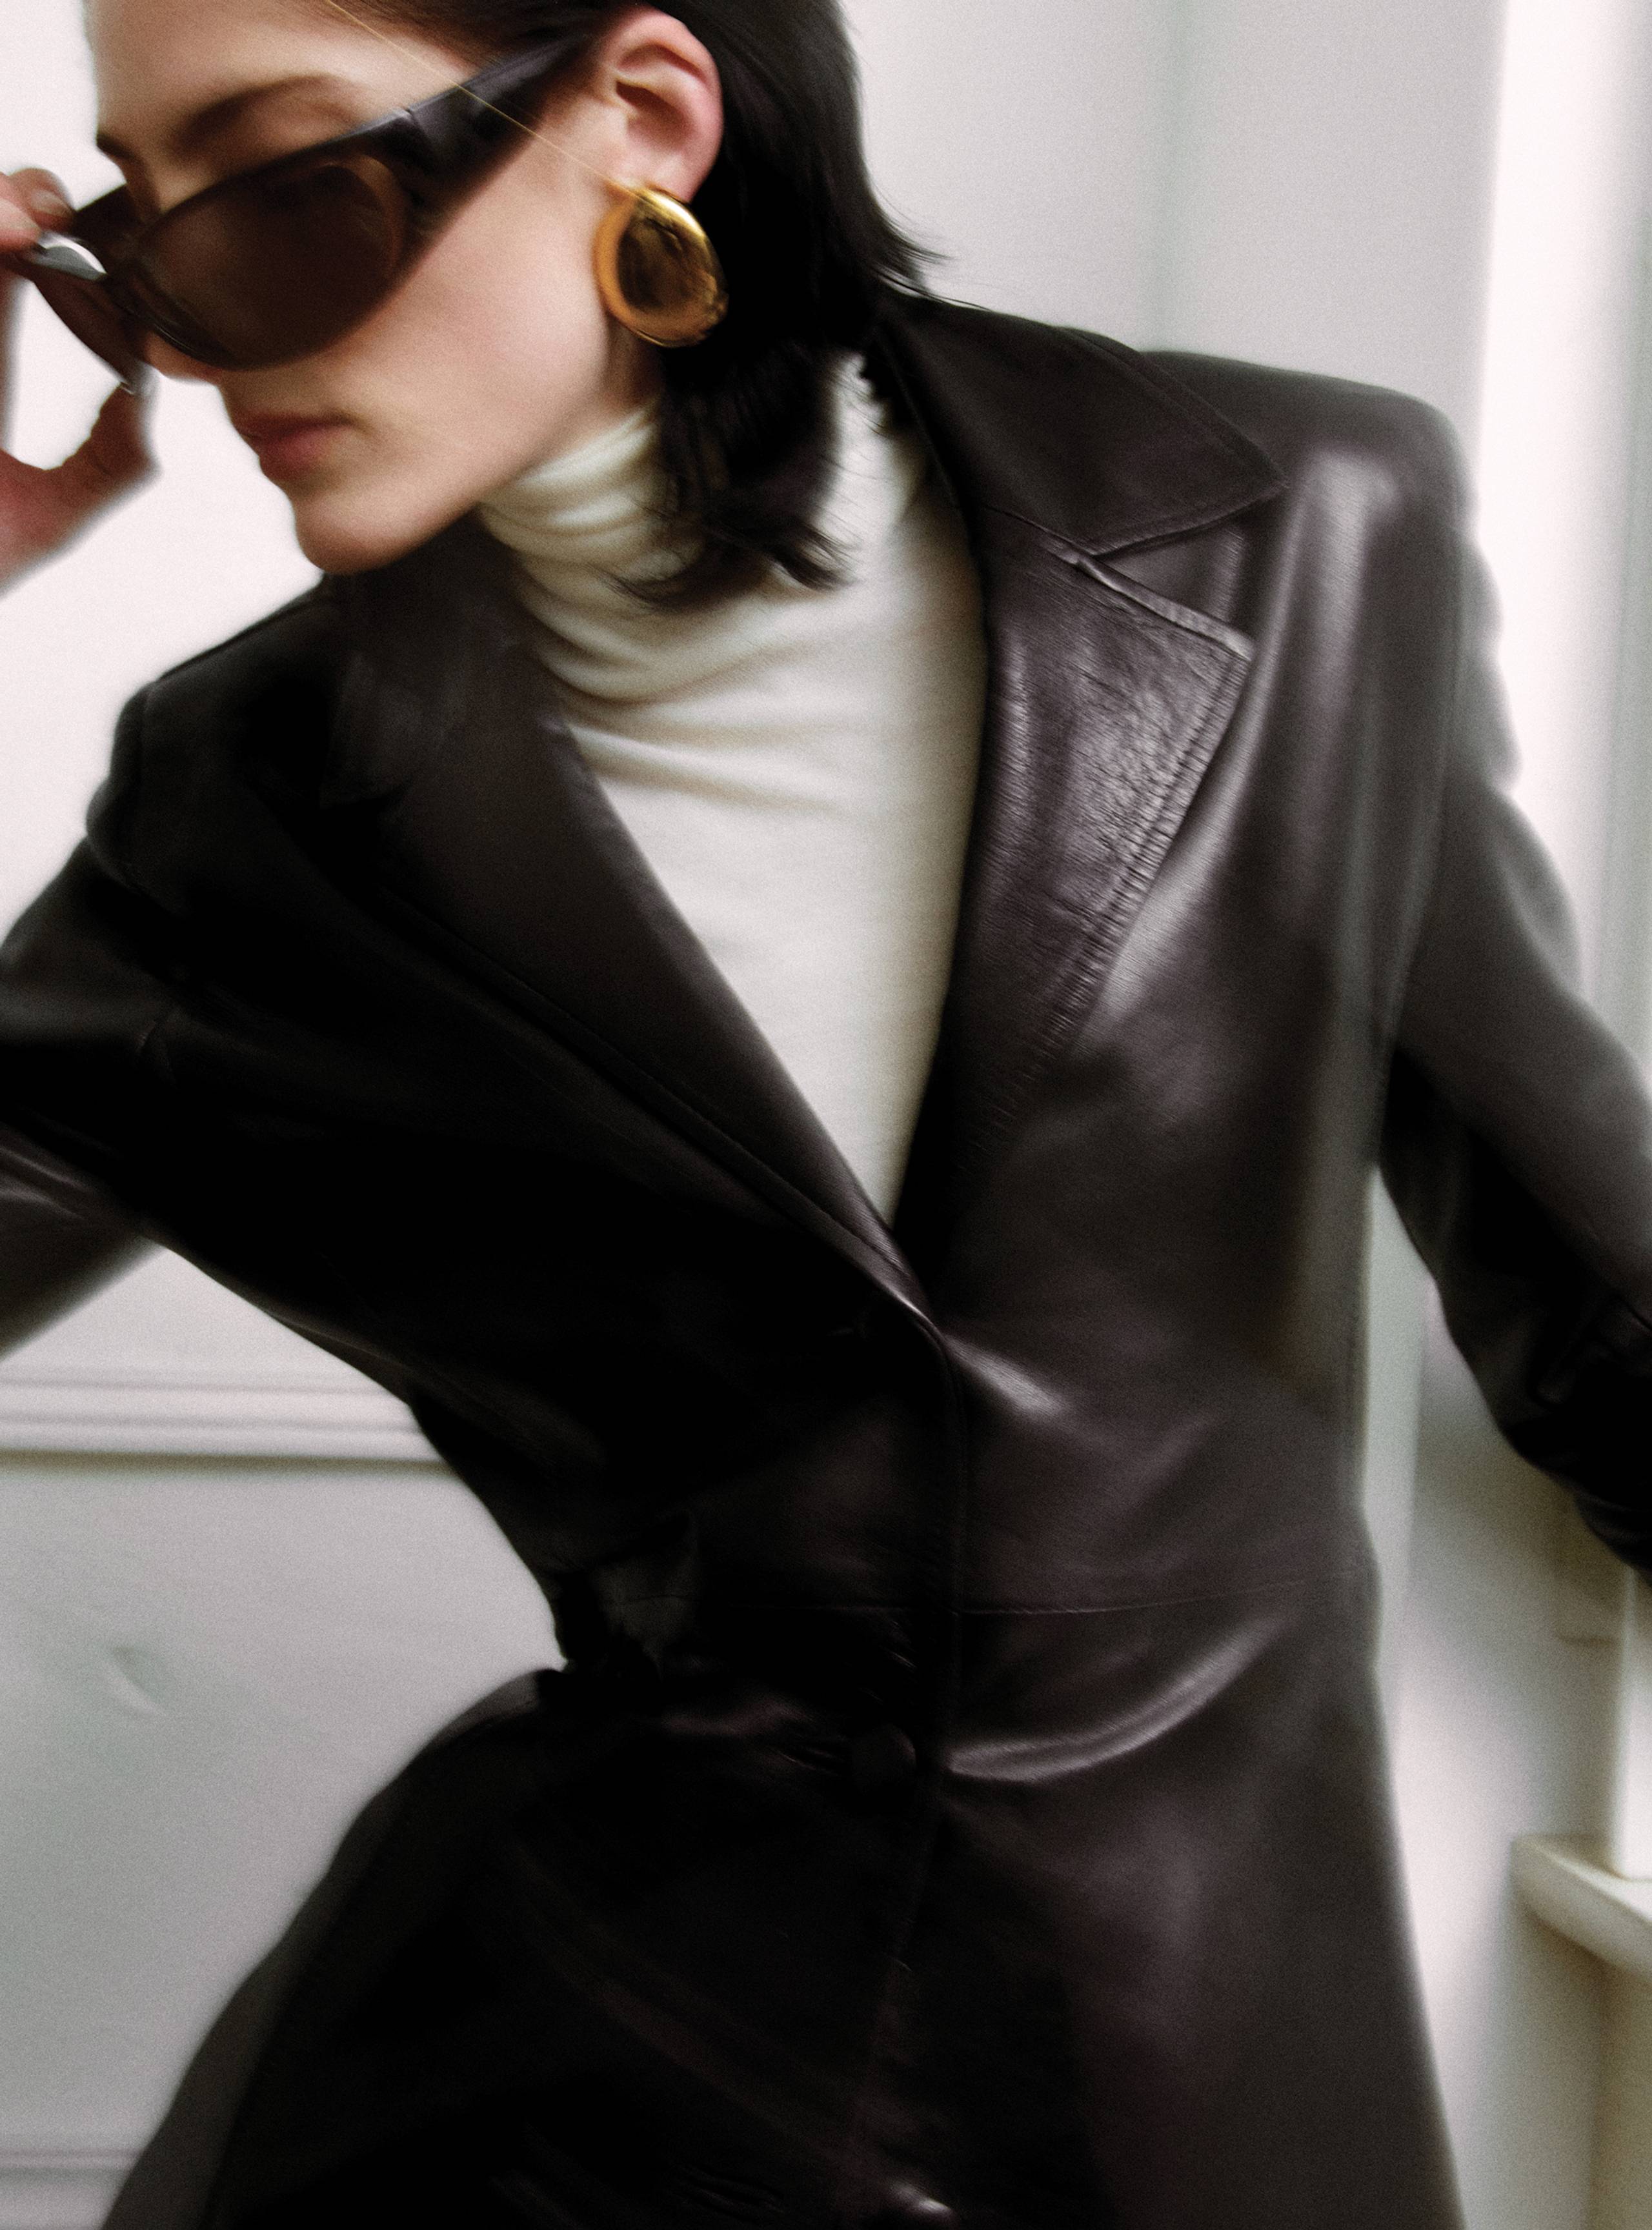 A model holding her sunglasses wearing the Winona Black fitted leather jacket